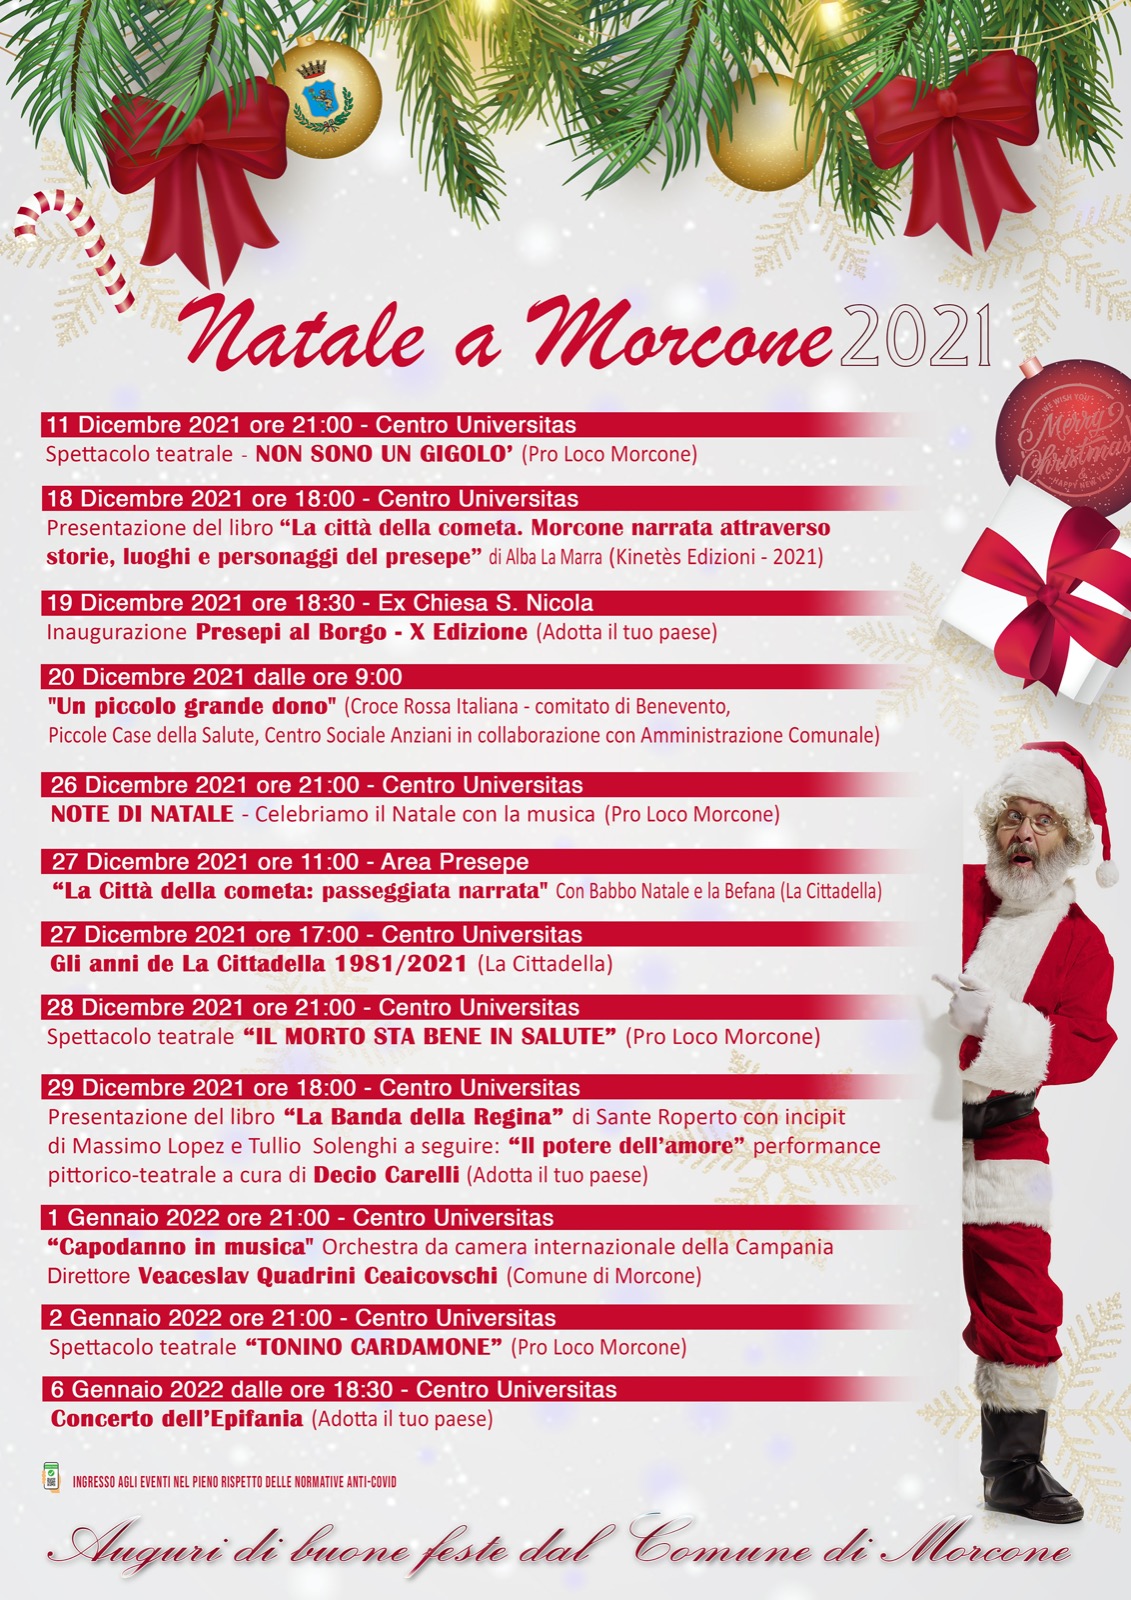 Natale a Morcone2021